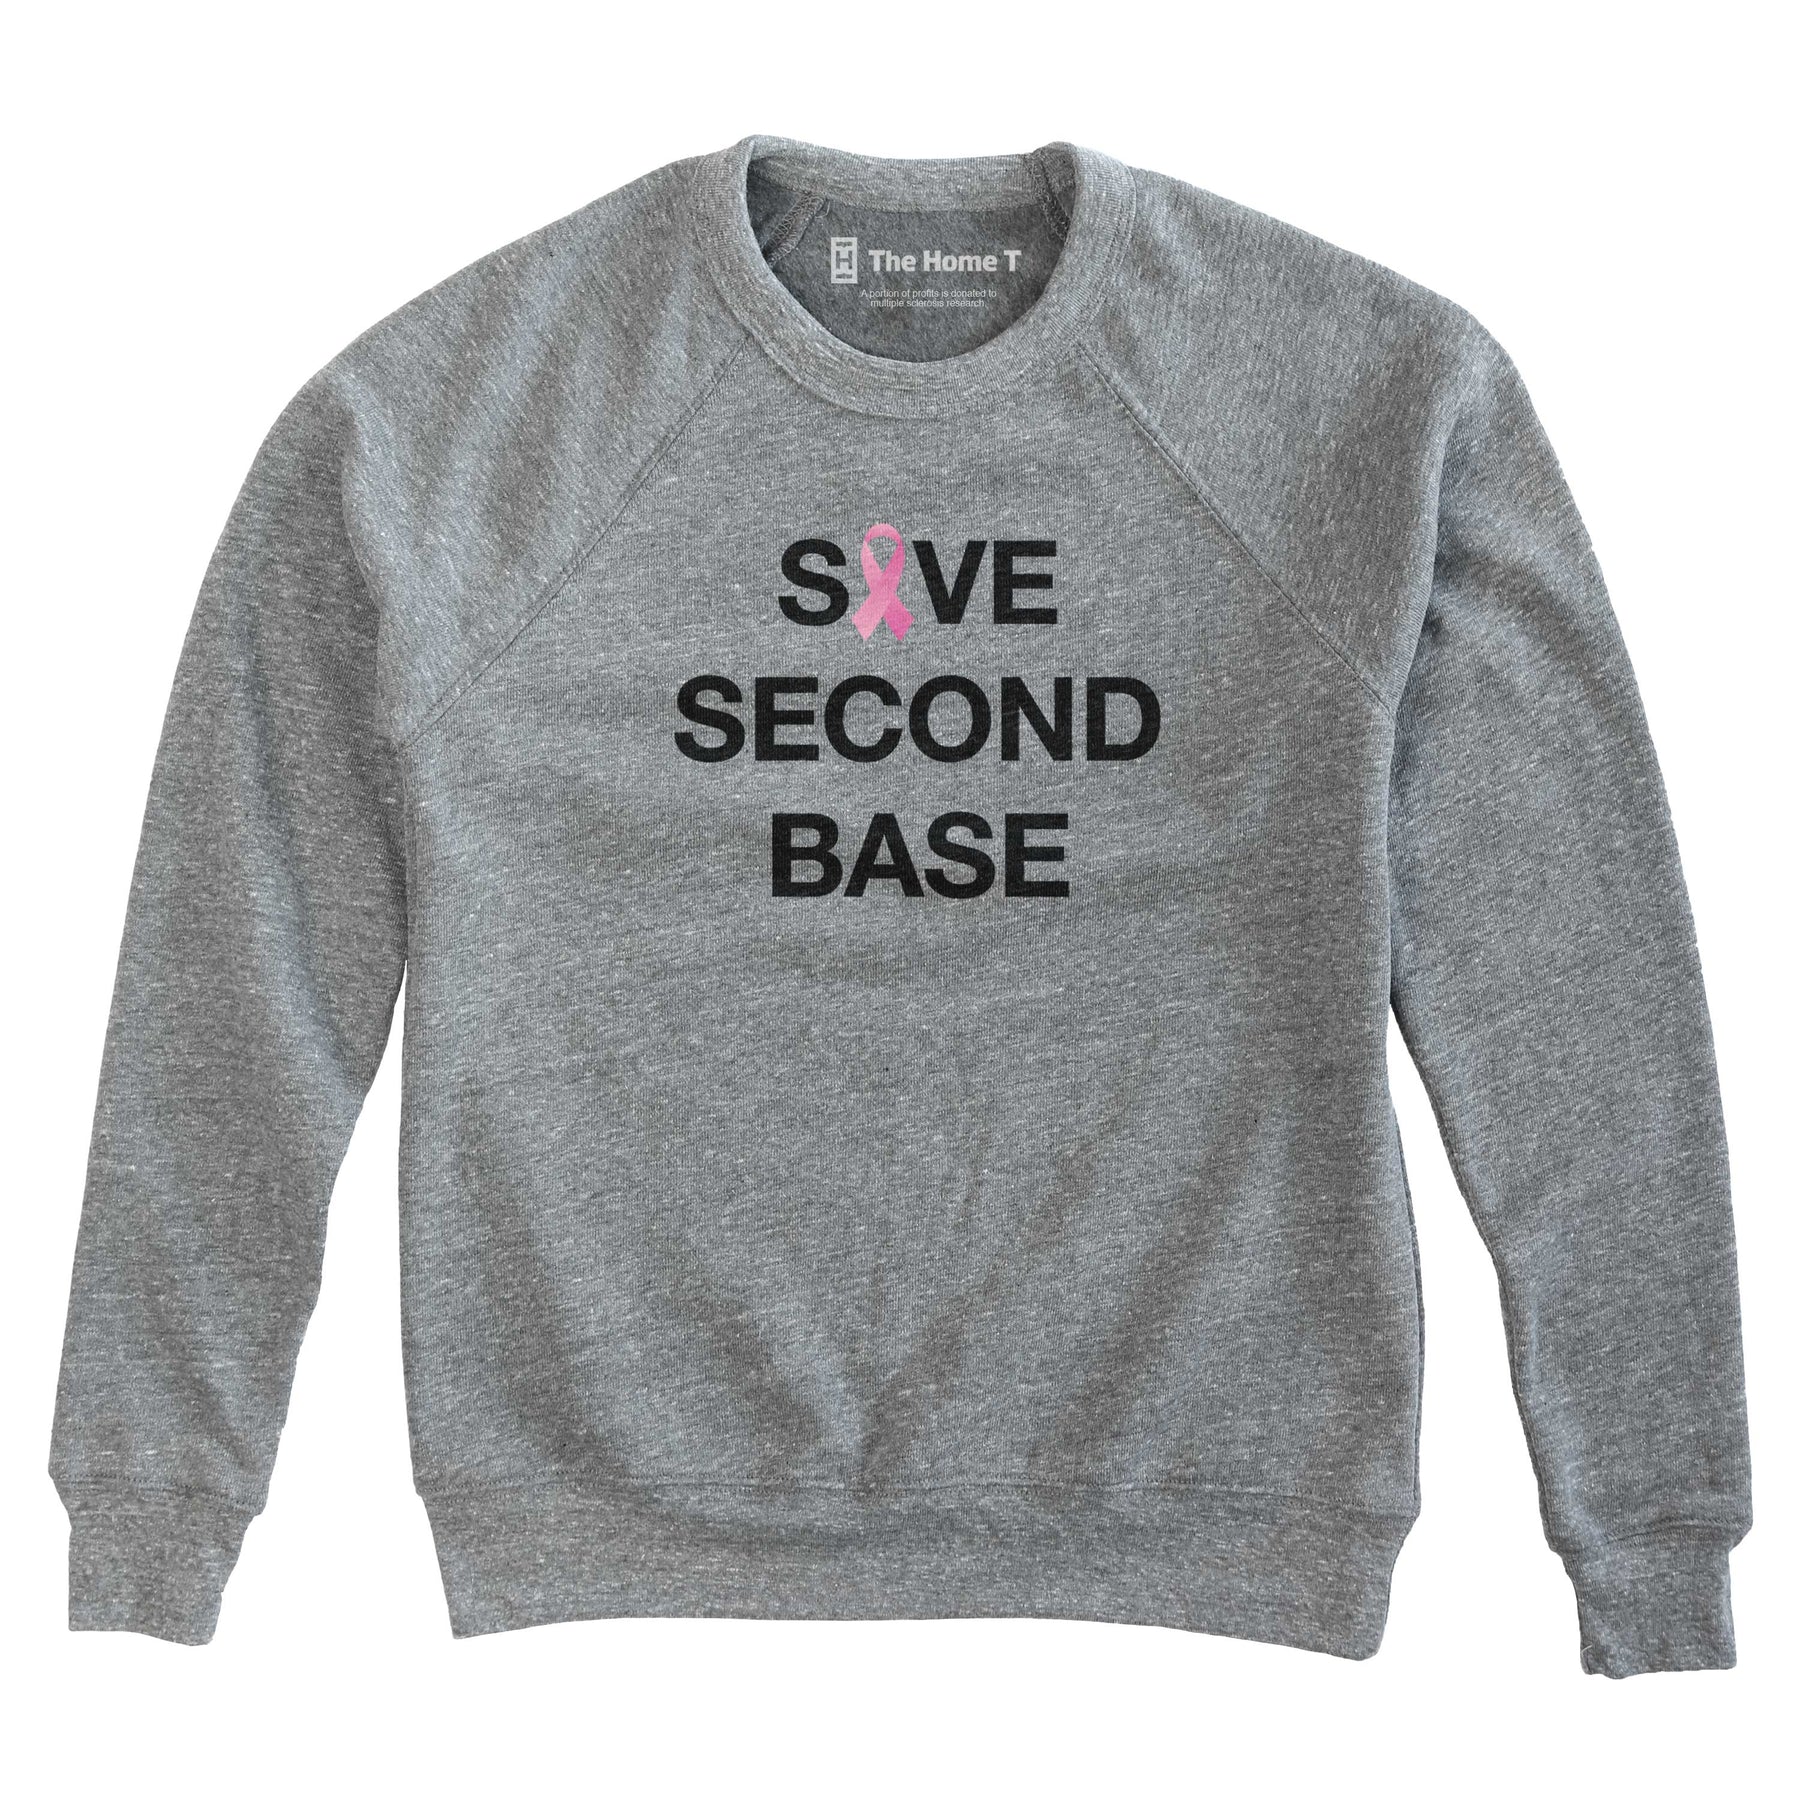 Save Second Base Lifestyle The Home T XS Sweatshirt